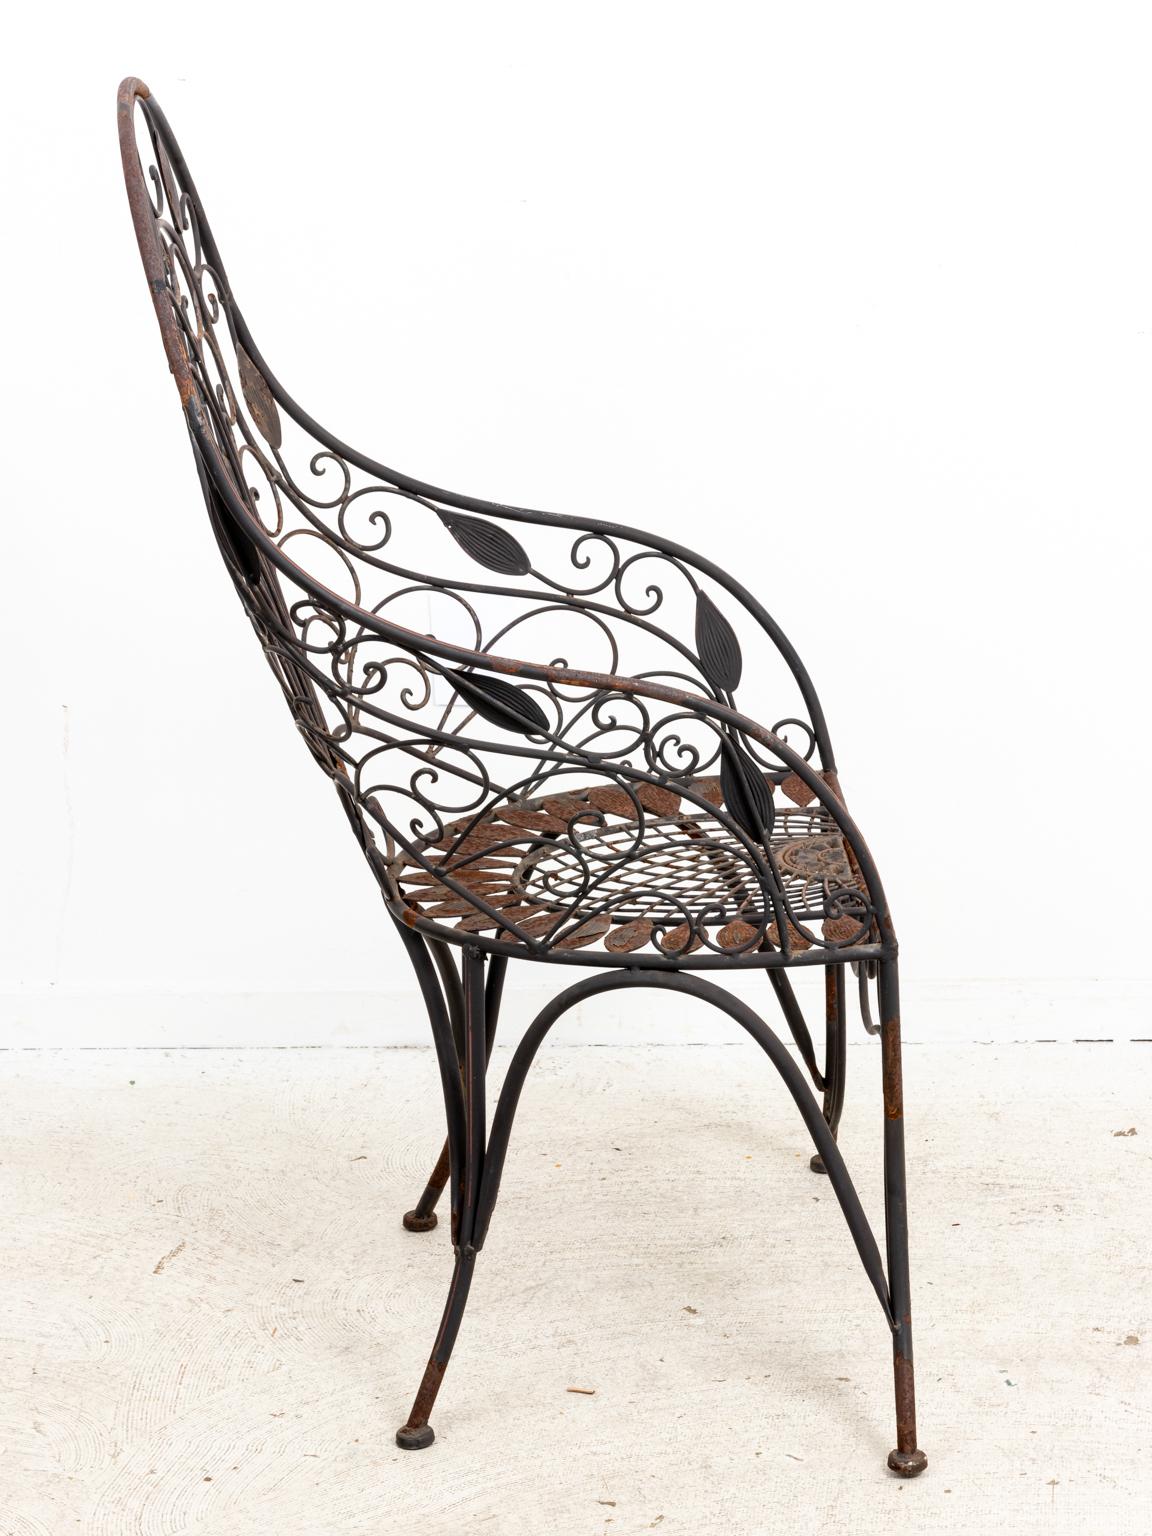 Pair of Wrought Iron Curved Back Garden Chairs with Scrollwork 2